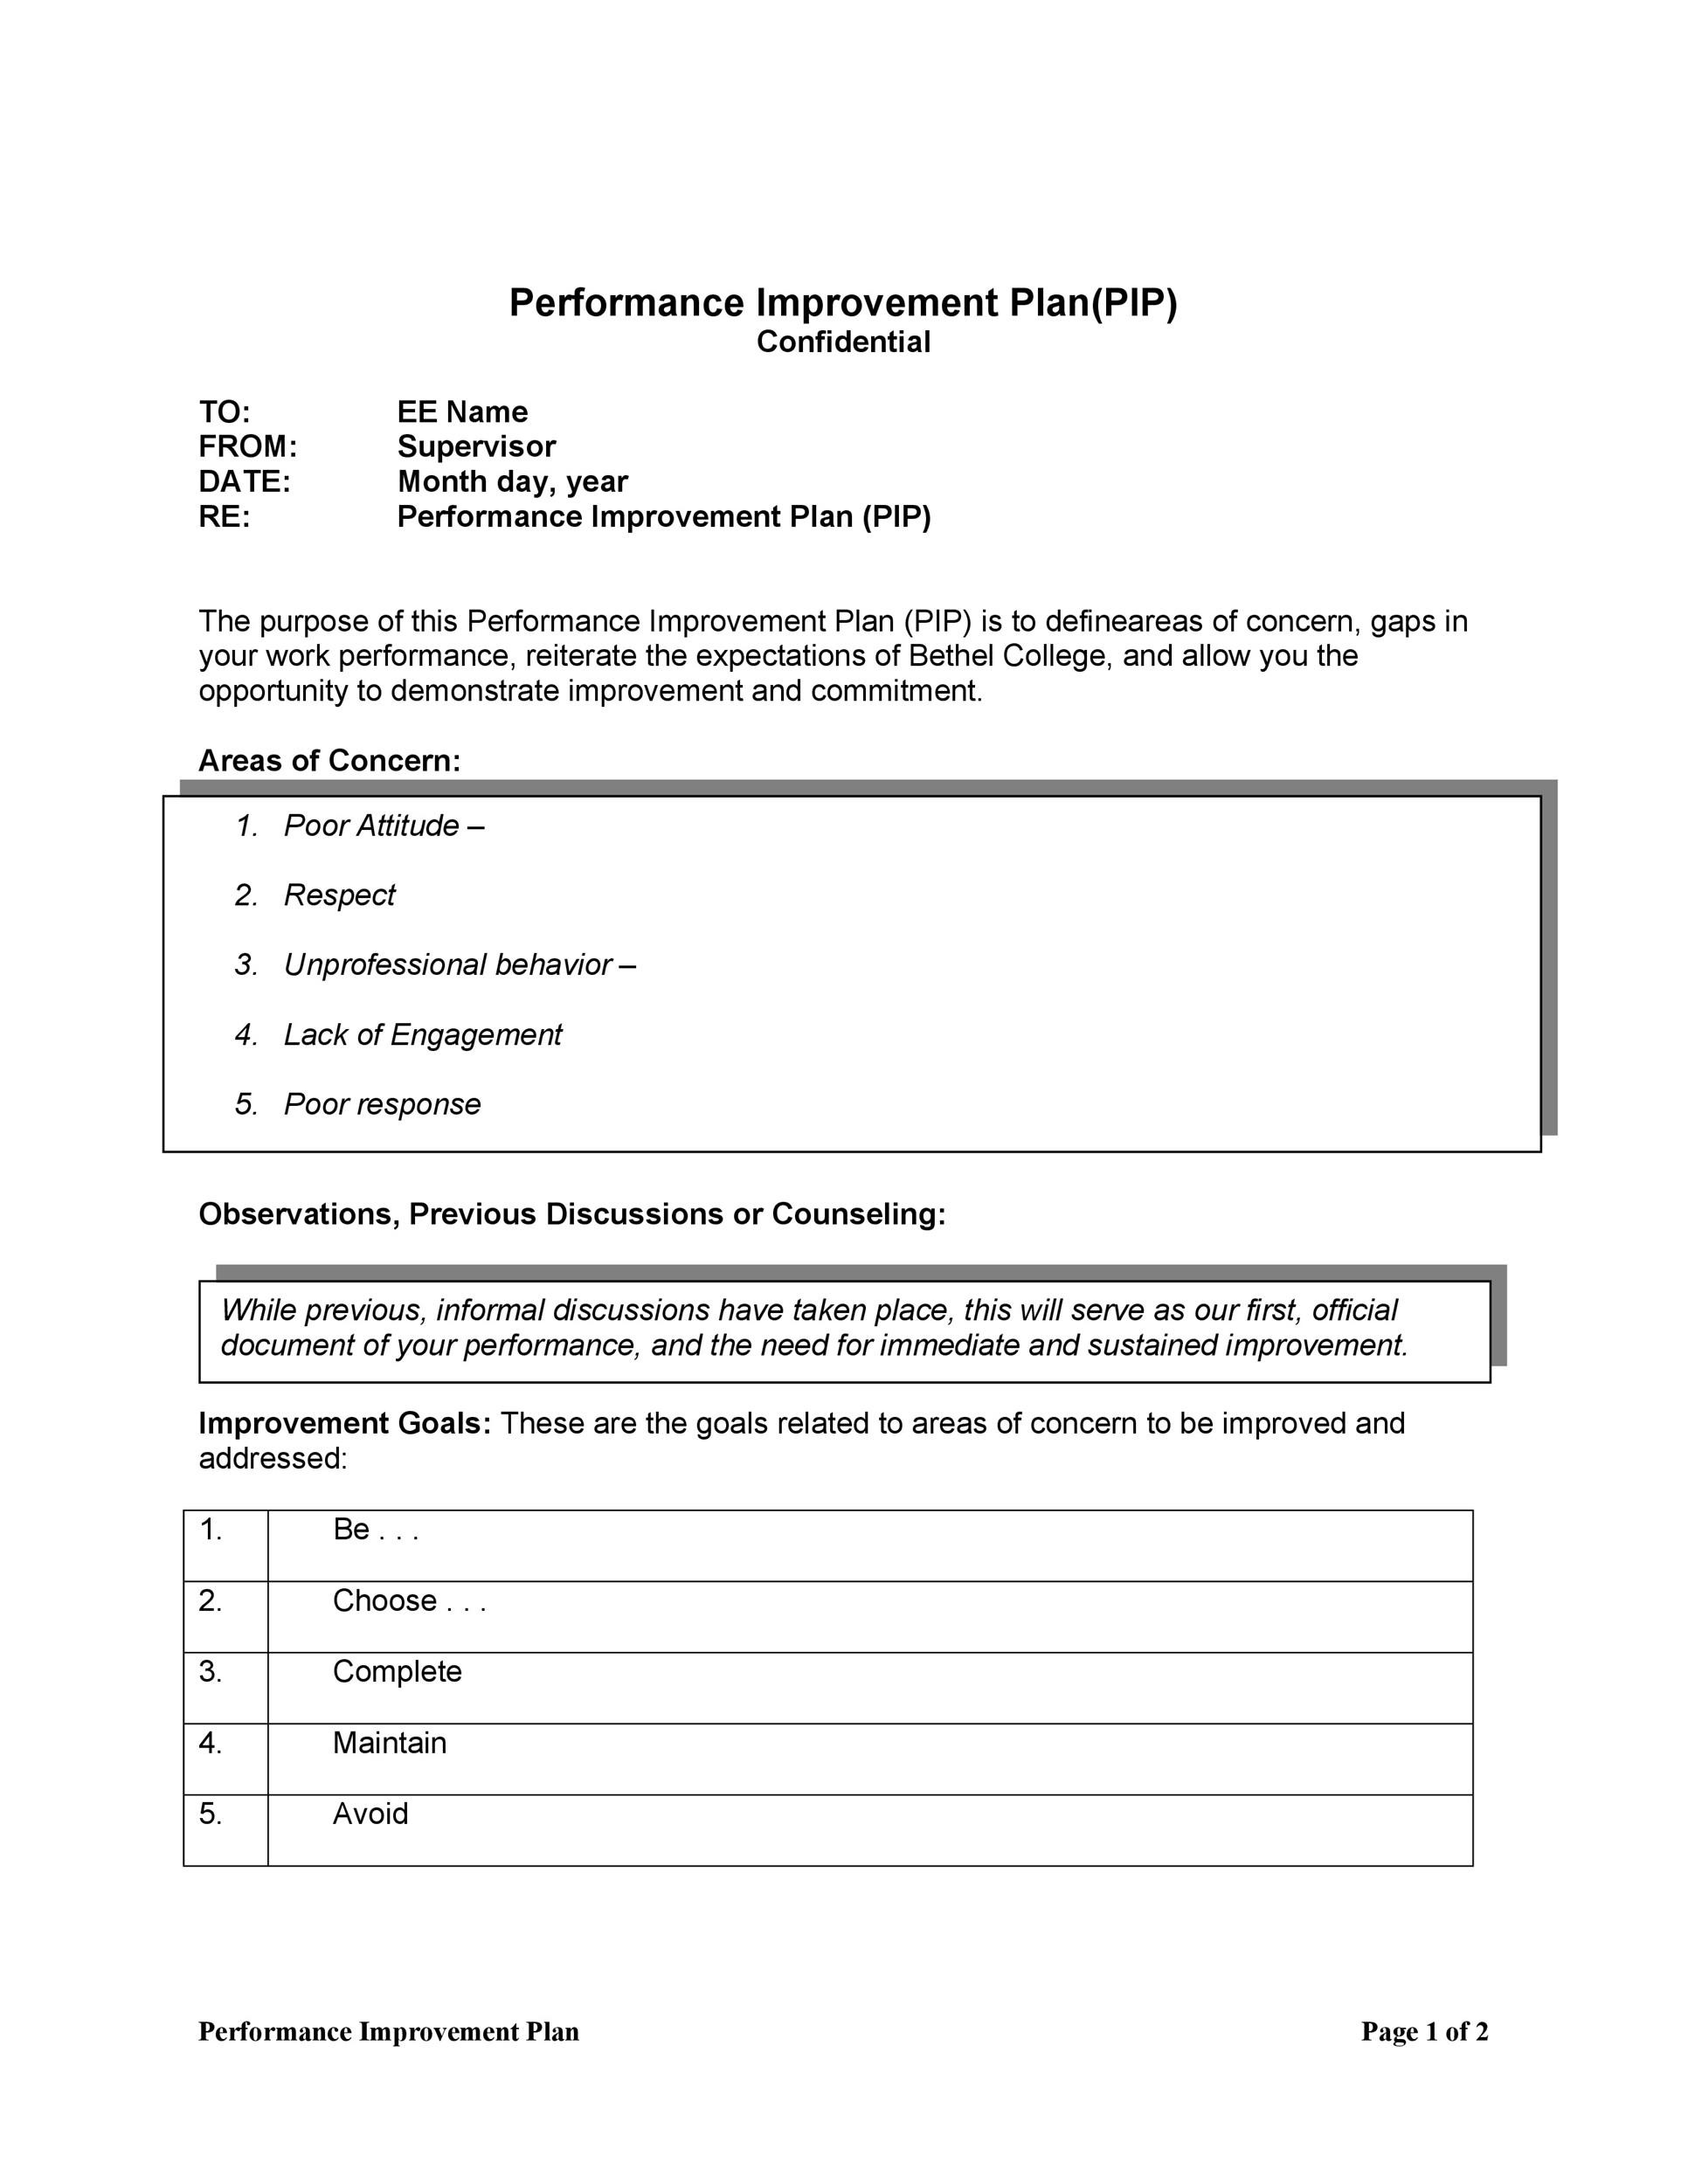 40 Performance Improvement Plan Templates And Examples 8223